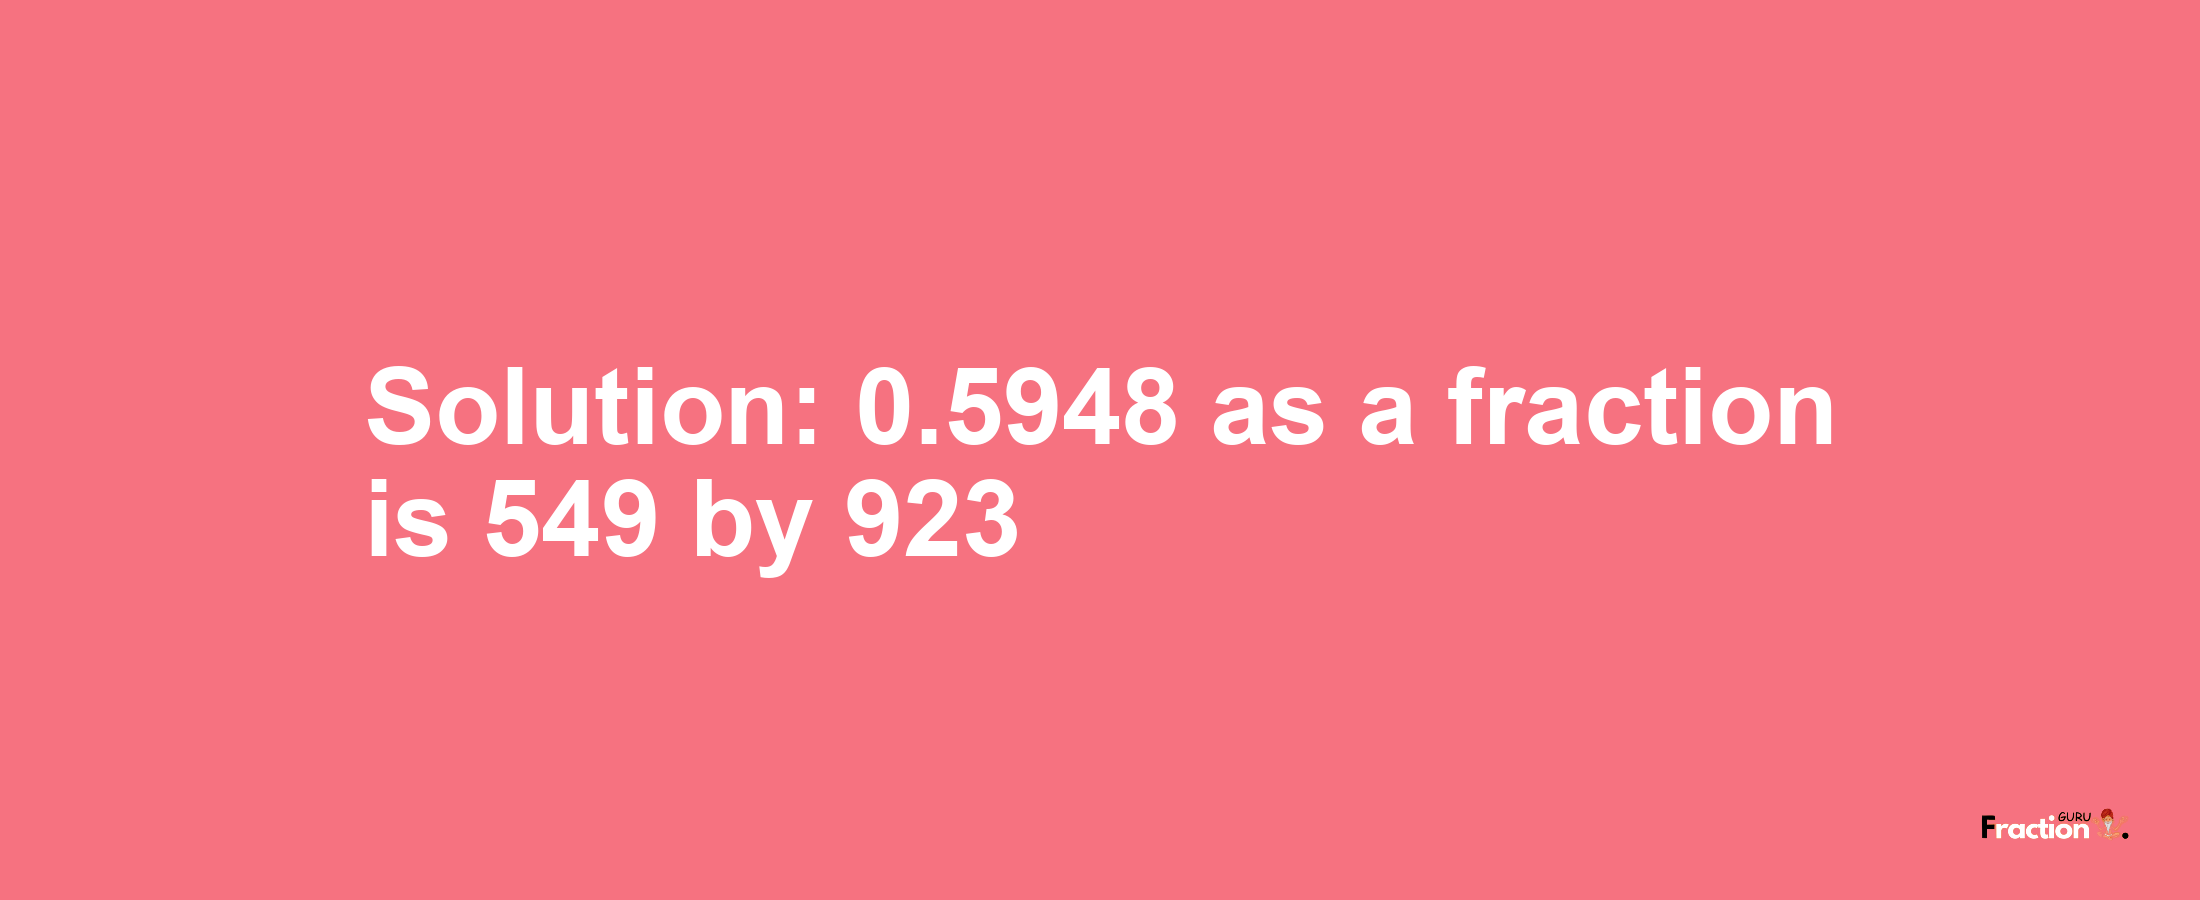 Solution:0.5948 as a fraction is 549/923